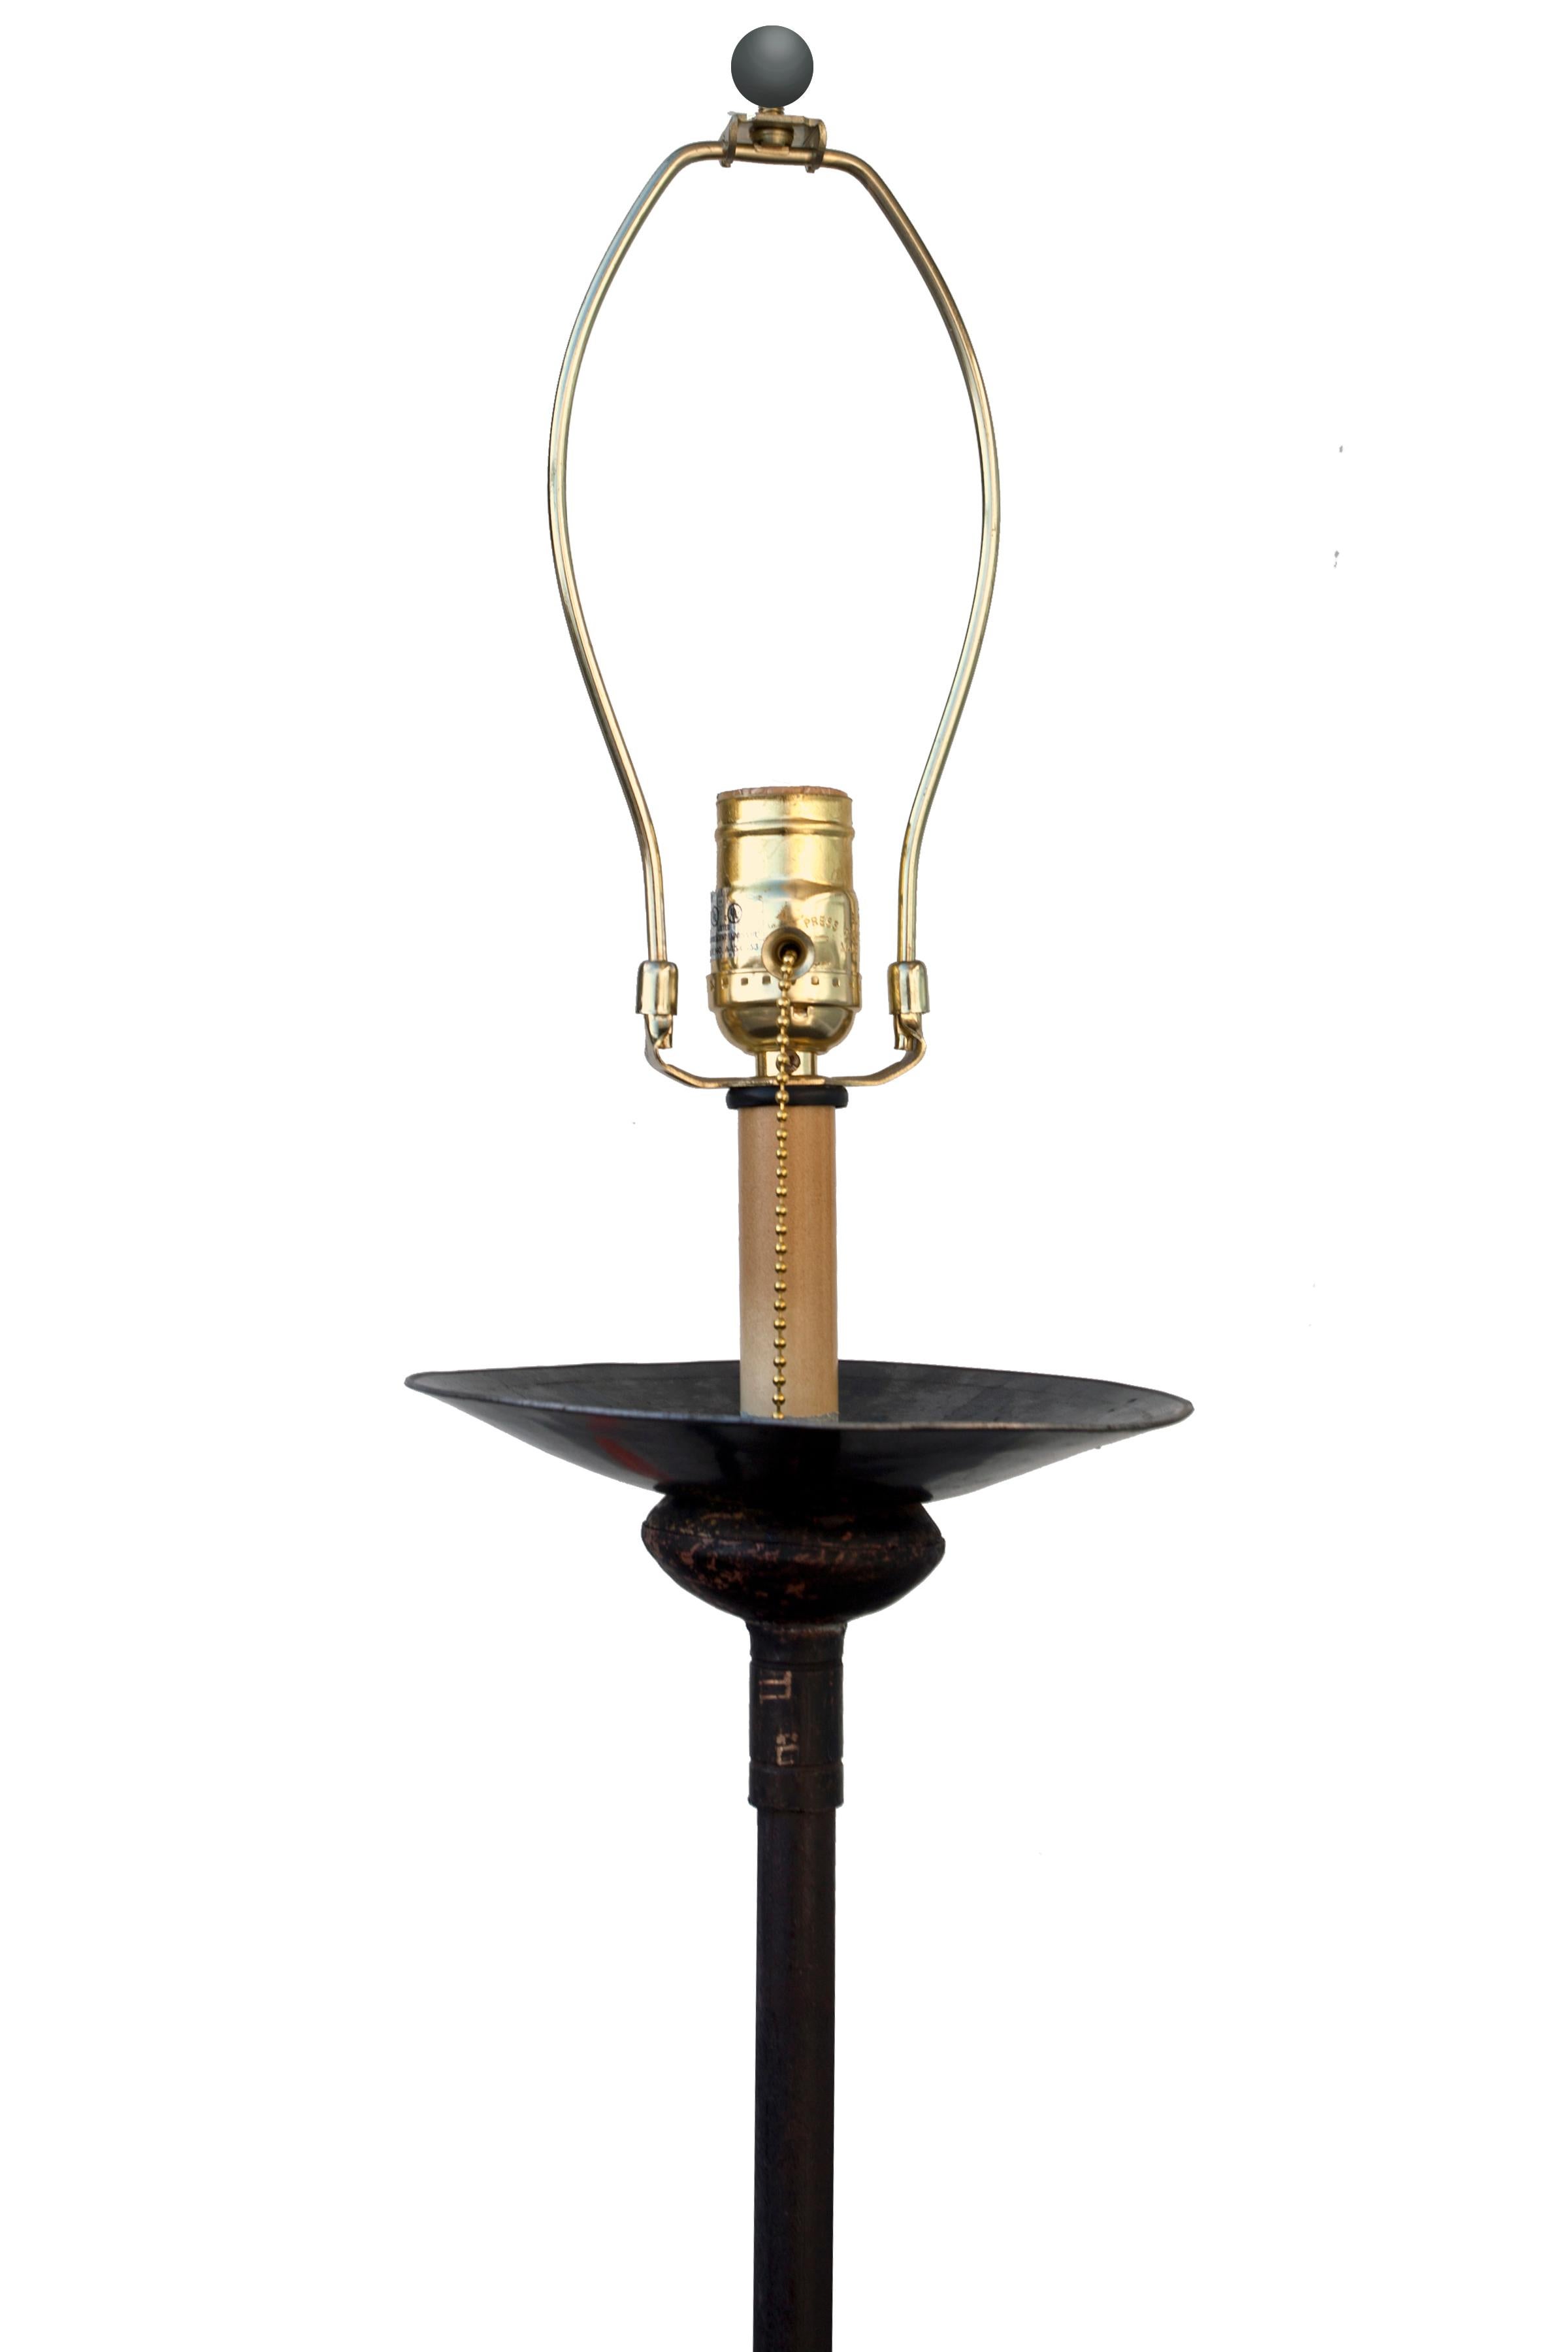 Forged Santa Barbara Mission Wrought Iron Floor Lamp For Sale